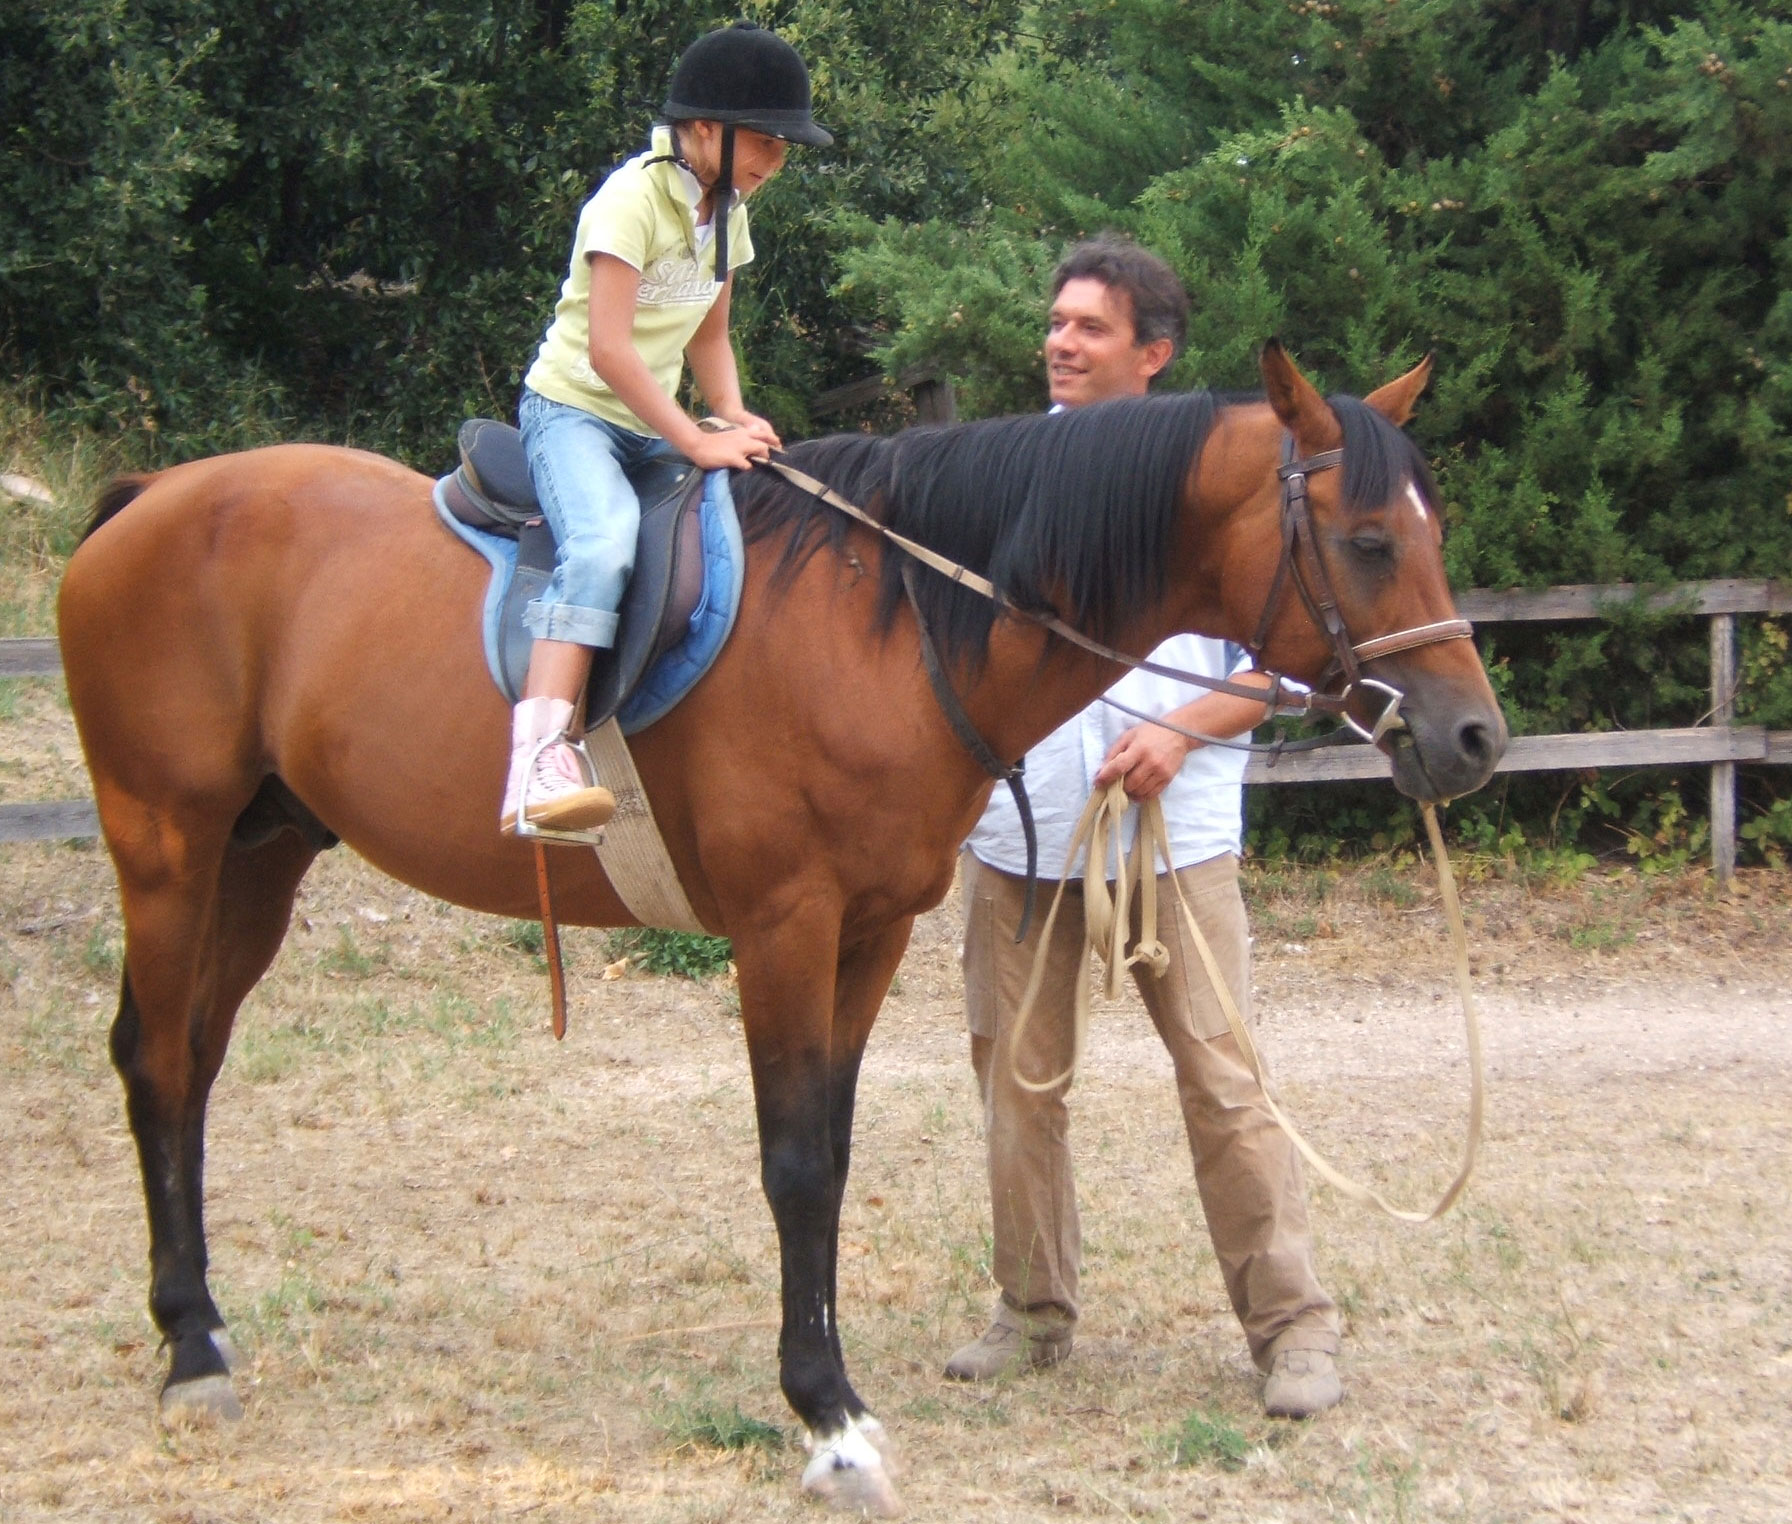 Horse back riding lessons just for kids at Caravanserraglio in Marche Italy